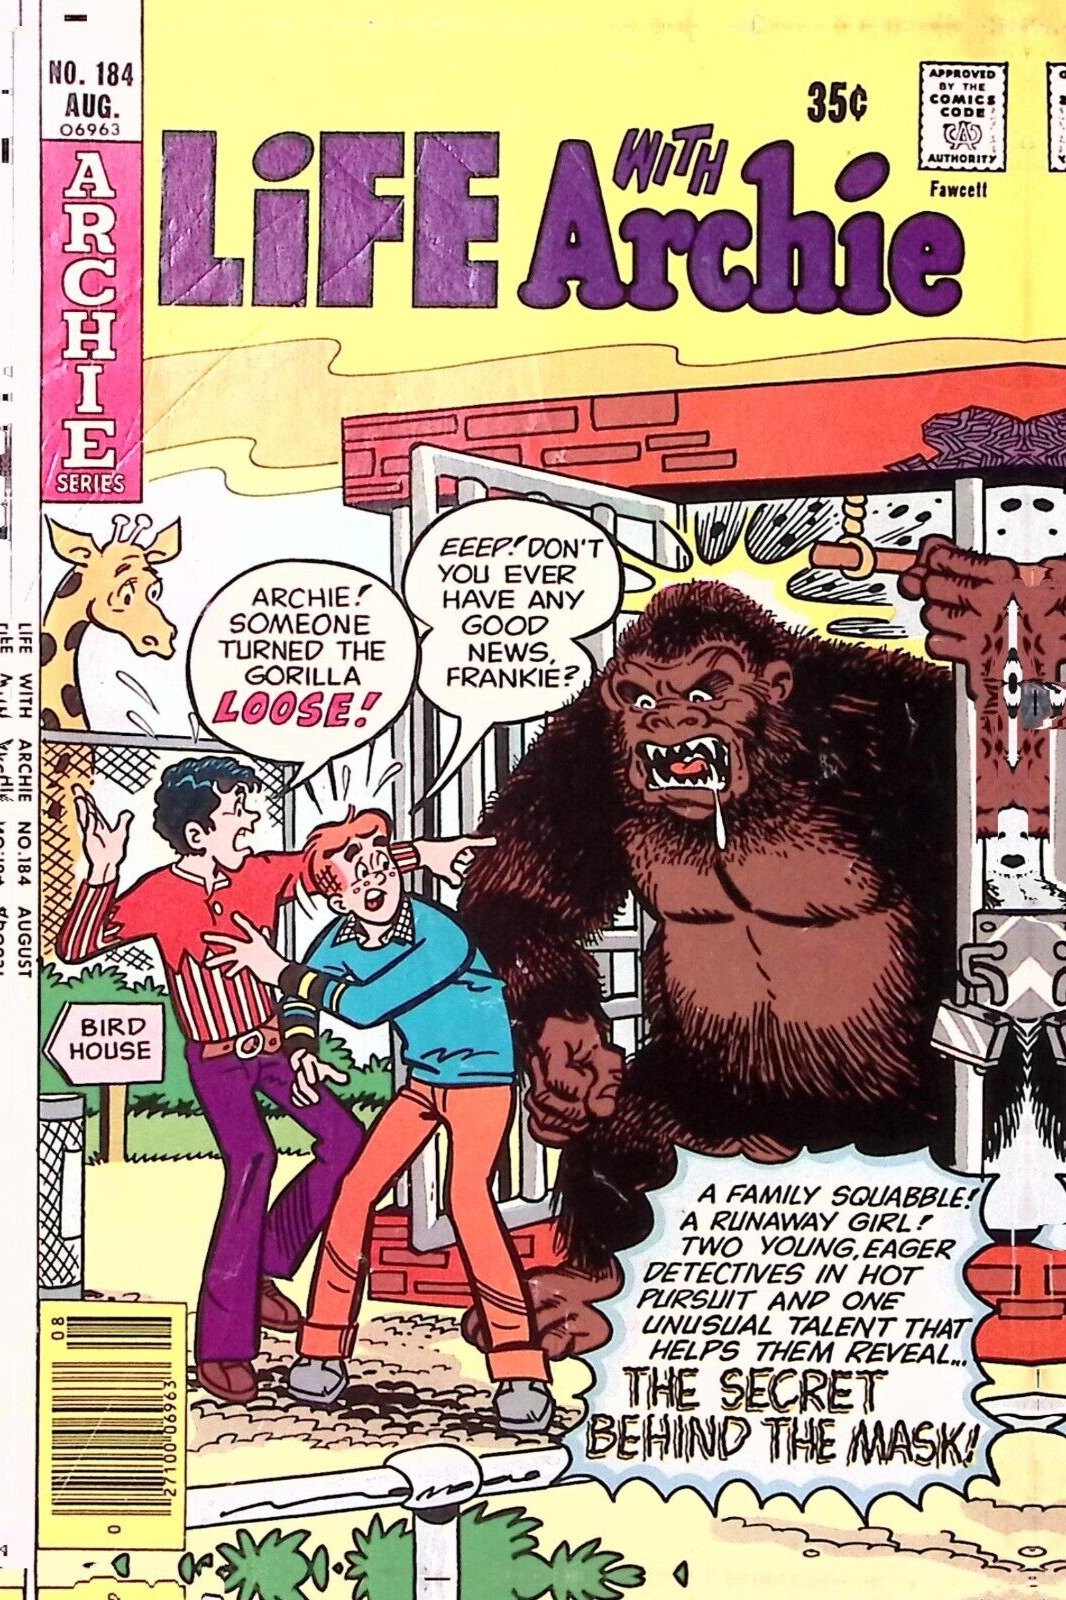 1977 LIFE WITH ARCHIE #184 AUG THE SECRET BEHIND THE MASK  Z2392